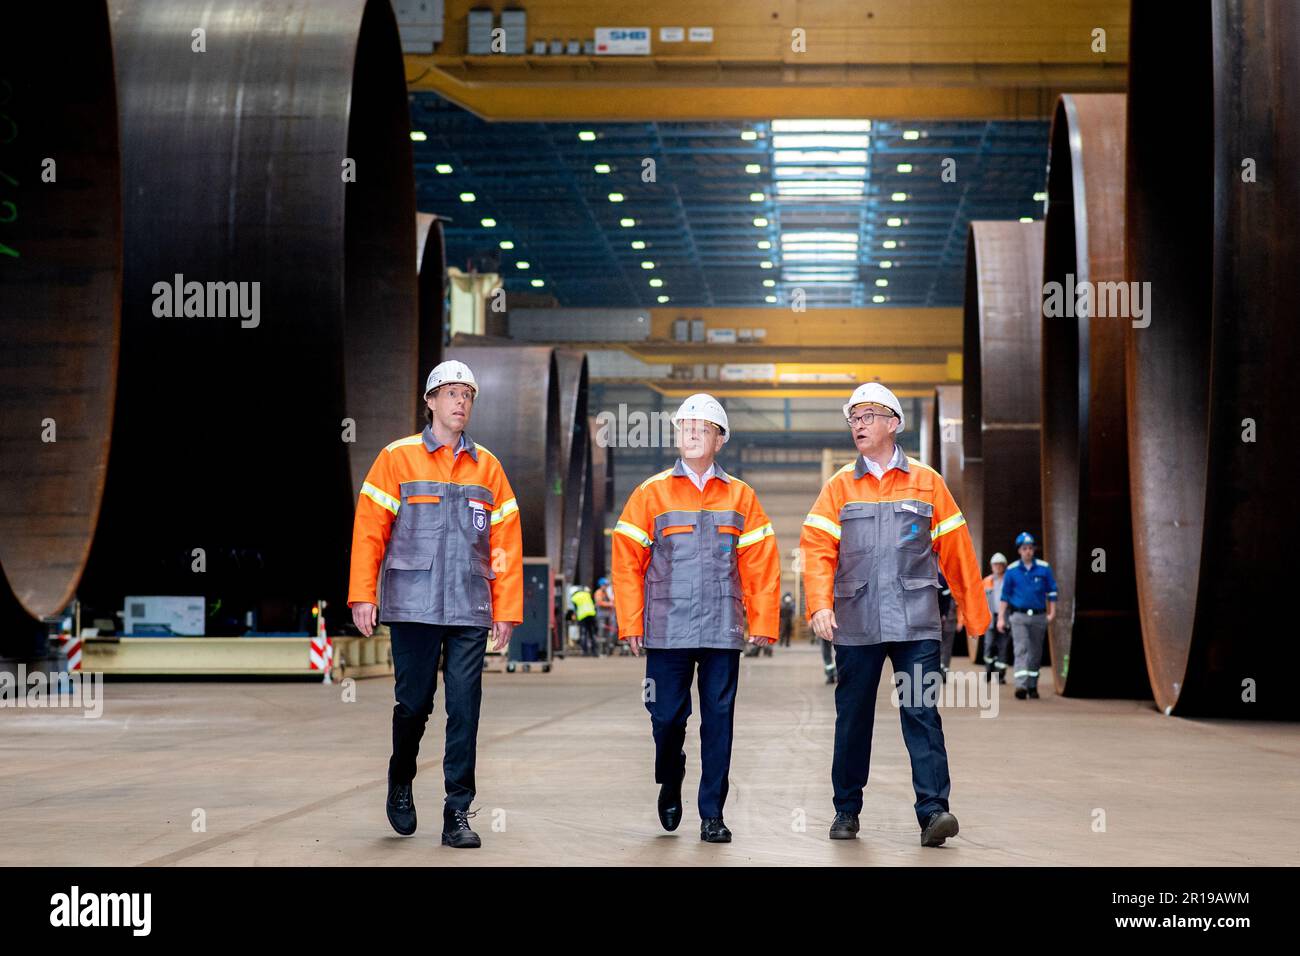 Nordenham, Germany. 12th May, 2023. Jonathan Weber (l-r), member of the Executive Board of Dillinger Hüttenwerke AG, German Chancellor Olaf Scholz (SPD) and Andreas Liessem, Managing Director of Steelwind Nordenham GmbH, walk through a production hall at Steelwind Nordenham GmbH, where steel foundations for offshore wind turbines are manufactured. Scholz visited the production of steel foundations, so-called monopiles, for wind turbines in offshore wind farms at Steelwind Nordenham GmbH. Credit: Hauke-Christian Dittrich/dpa/Alamy Live News Stock Photo